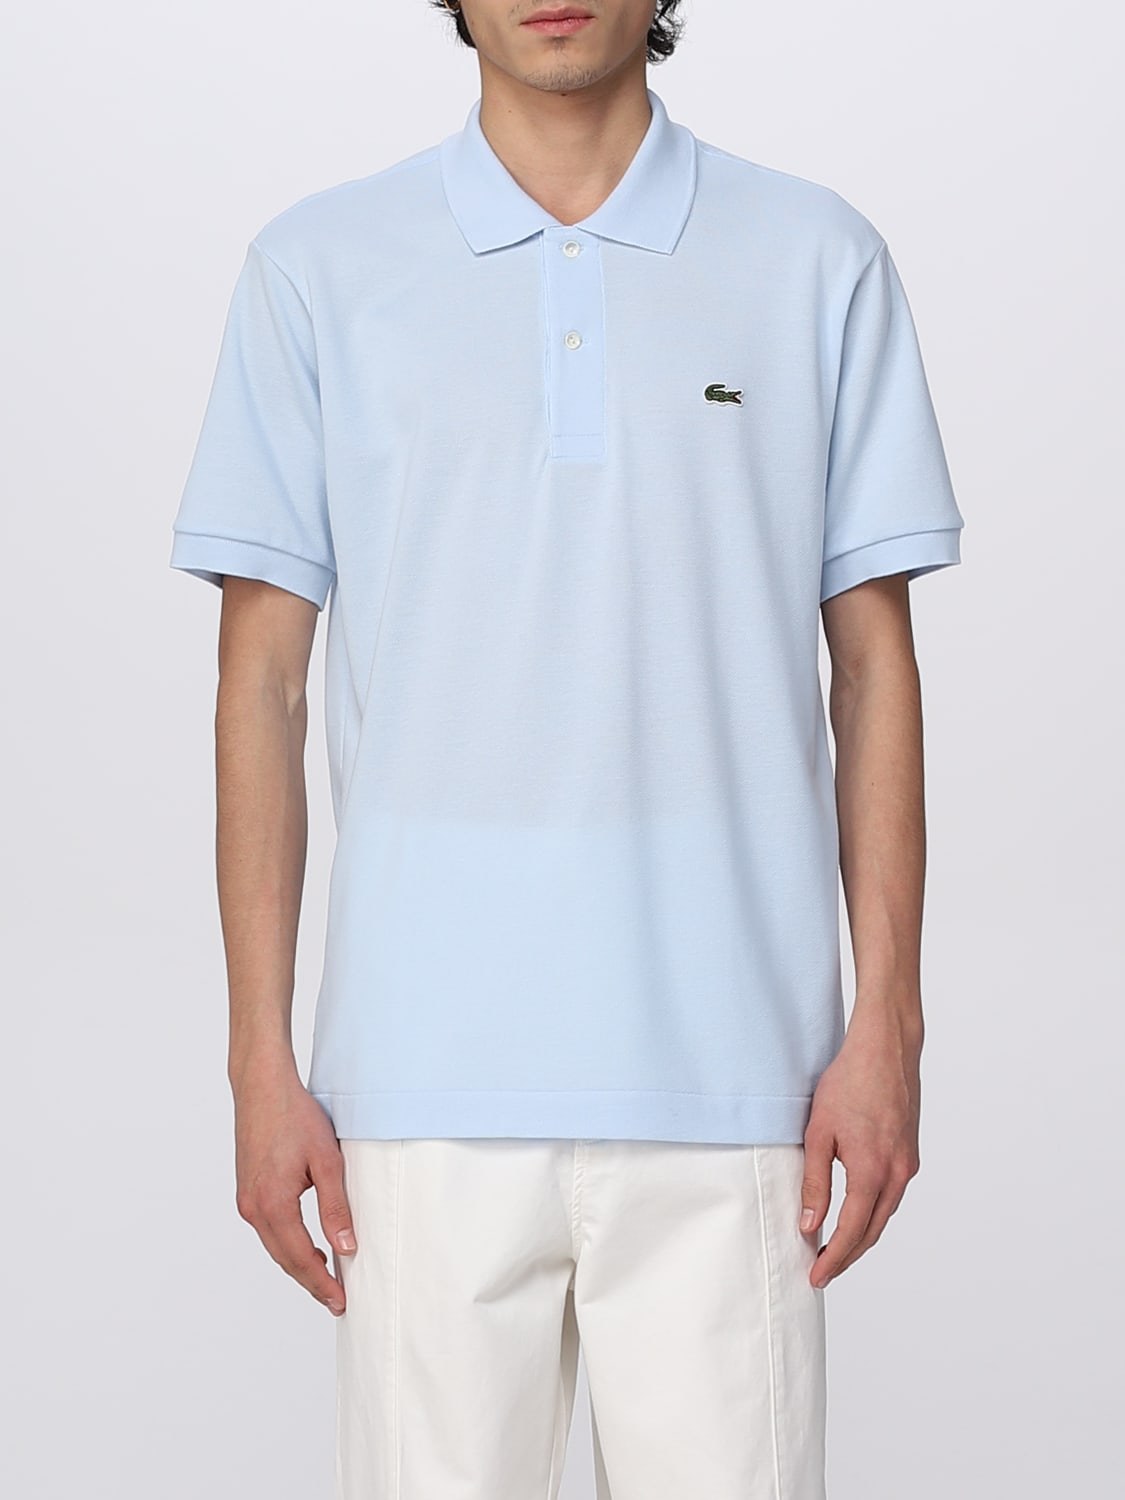 Lacoste Outlet: polo shirt man - Sky Blue | Lacoste shirt L1212 online at GIGLIO.COM